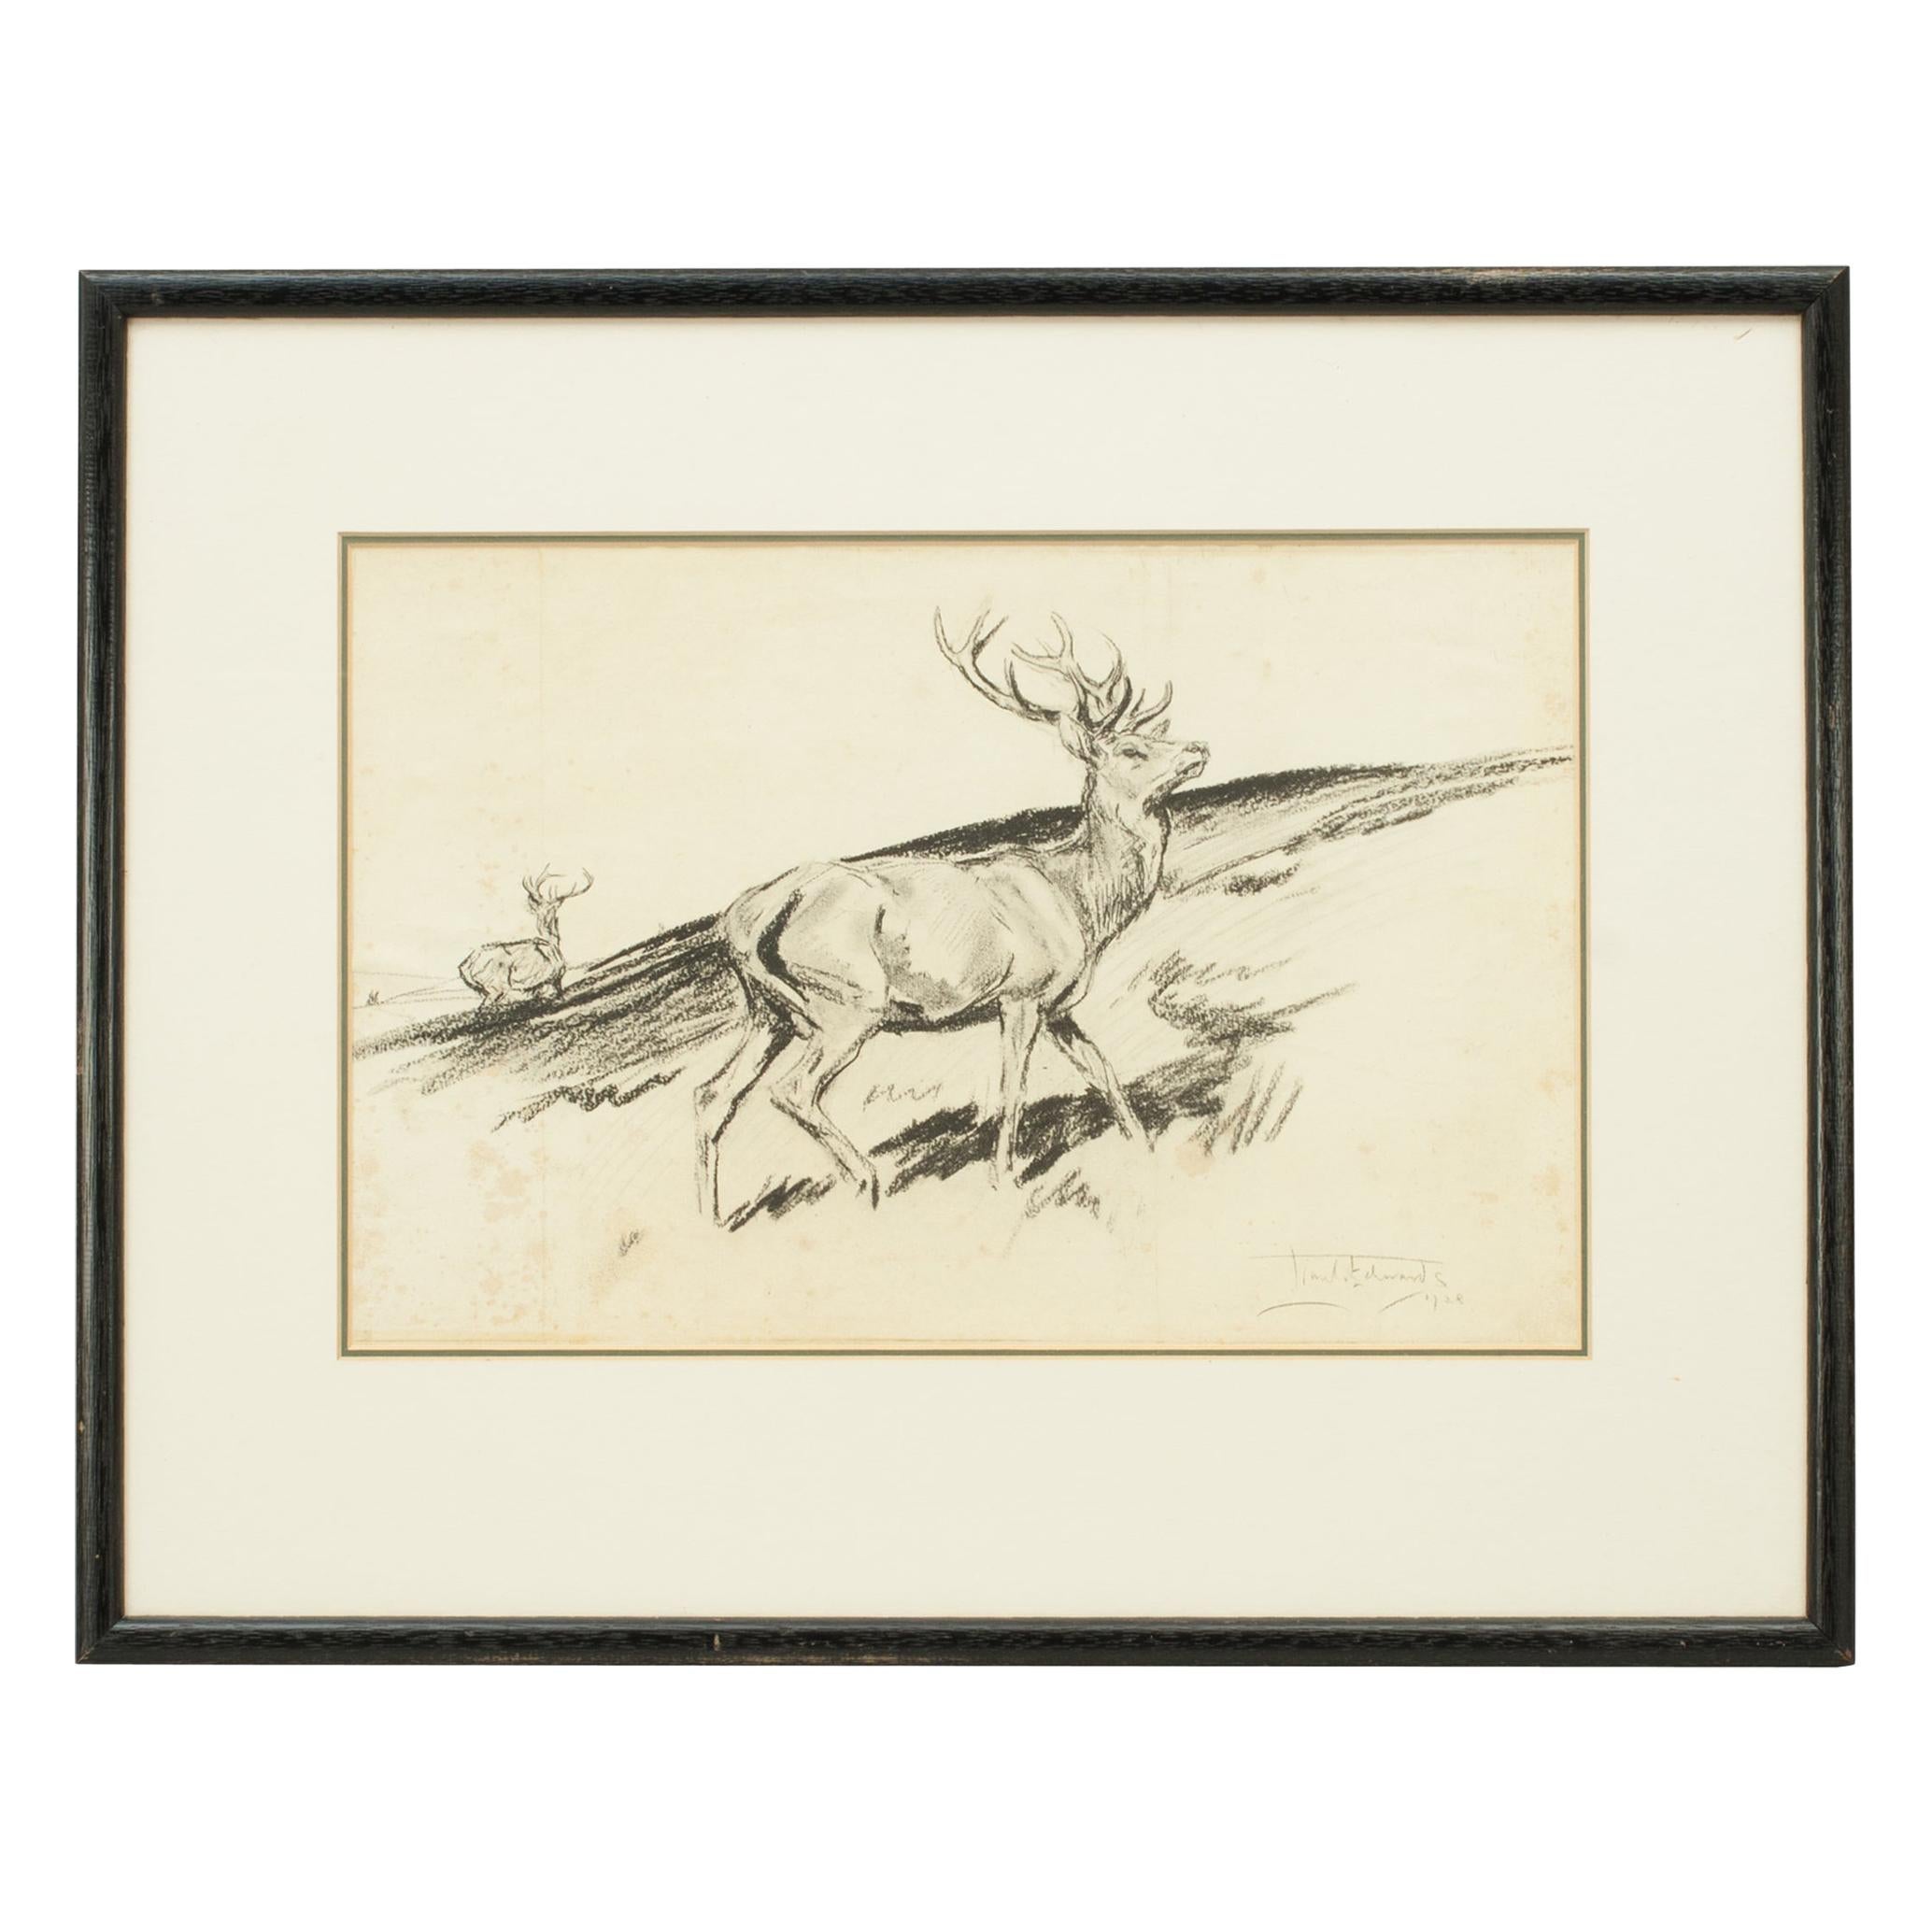 Original Lionel Edwards Pencil Drawing of a Stag on the Hill, Signed and Dated